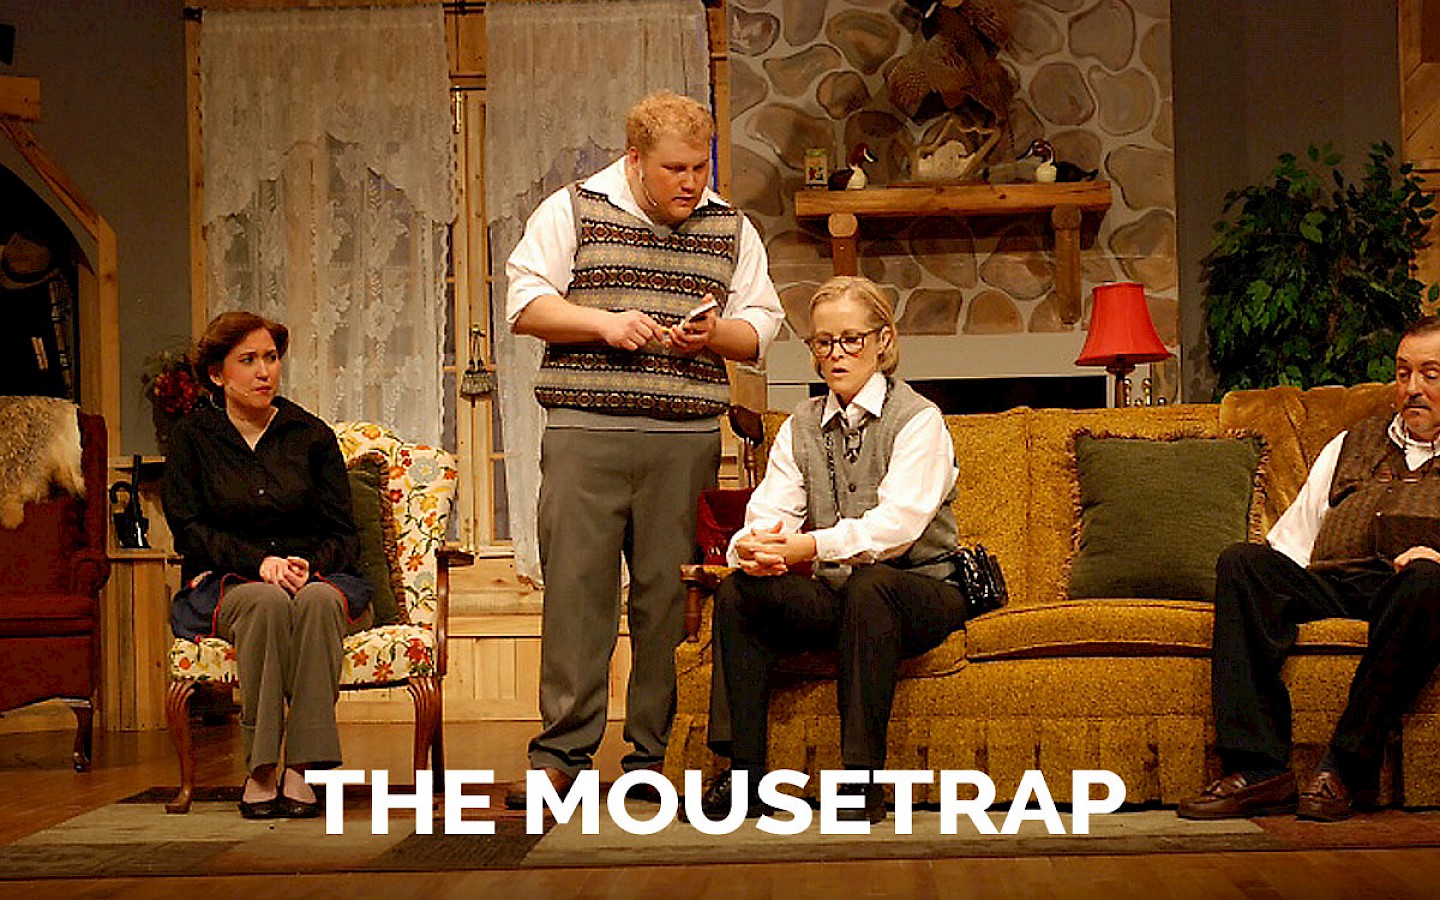 stage performers, for the play mousetrap